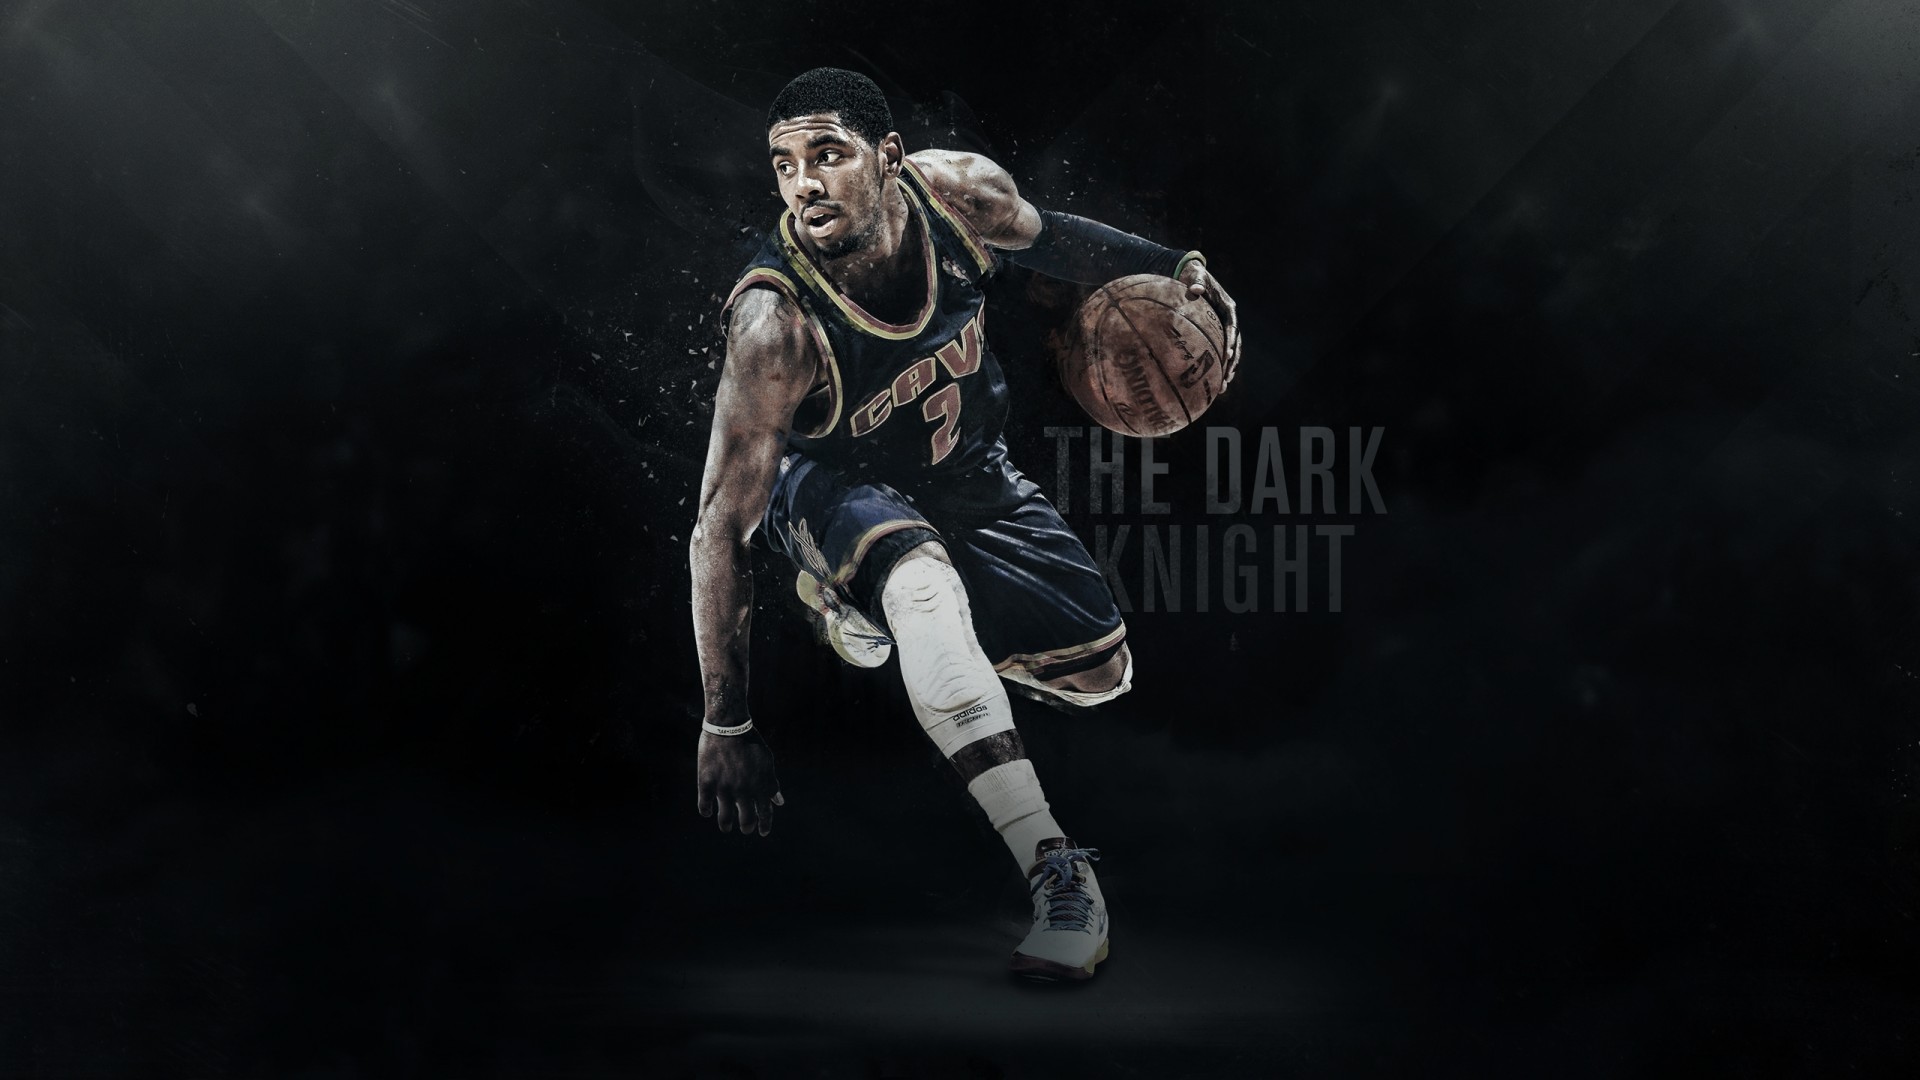 Bwack basketball player wallpapers and images - wallpapers, pictures, photos